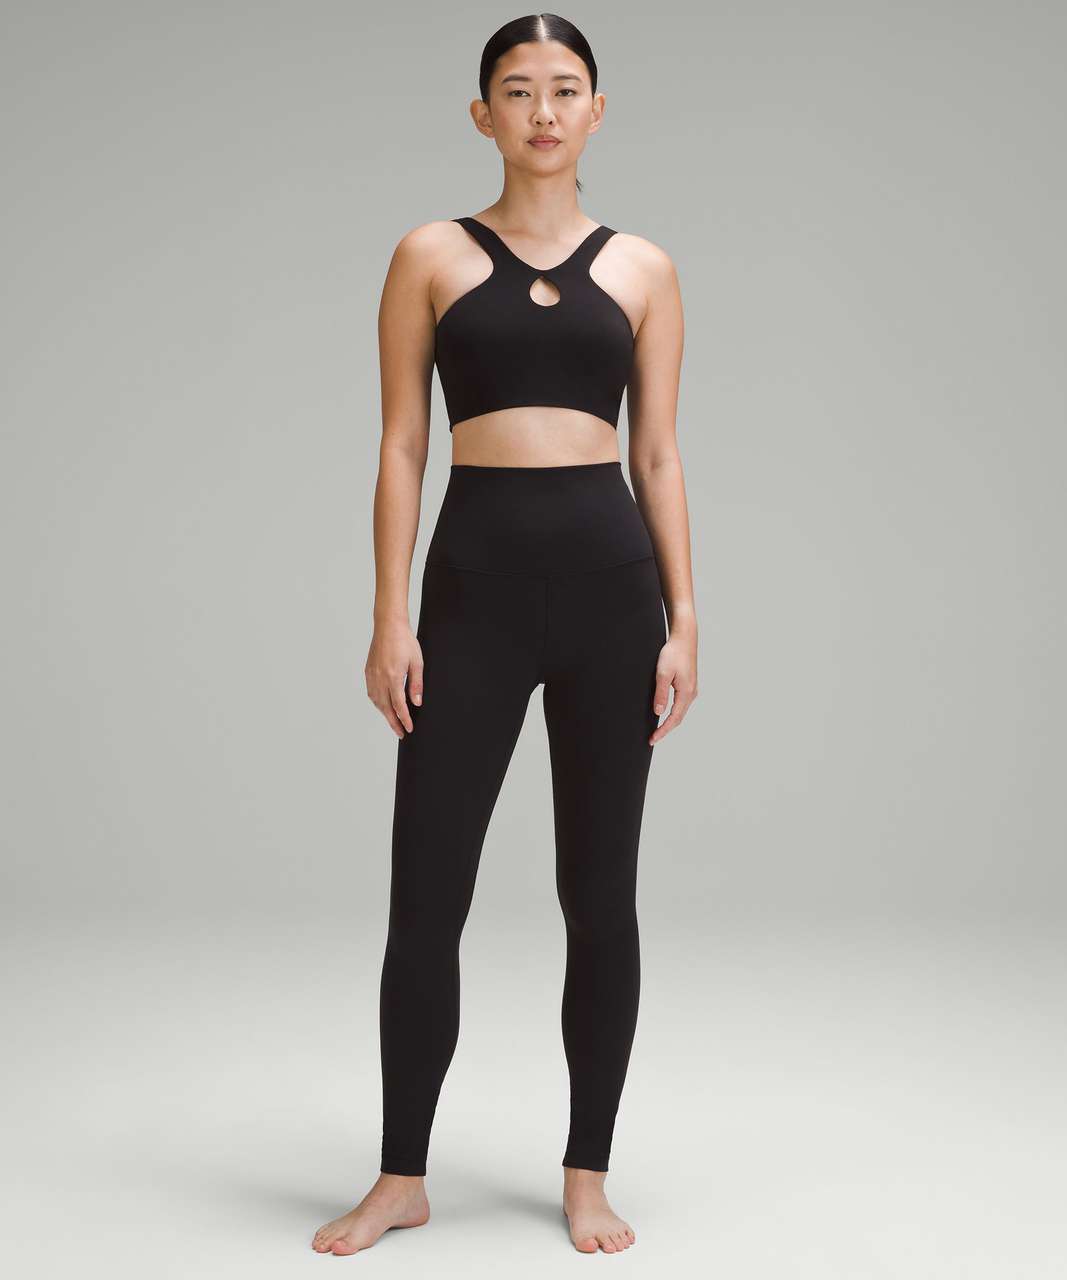 Lululemon SmoothCover Front Cut-Out Yoga Bra *Light Support, A/B Cup - Black